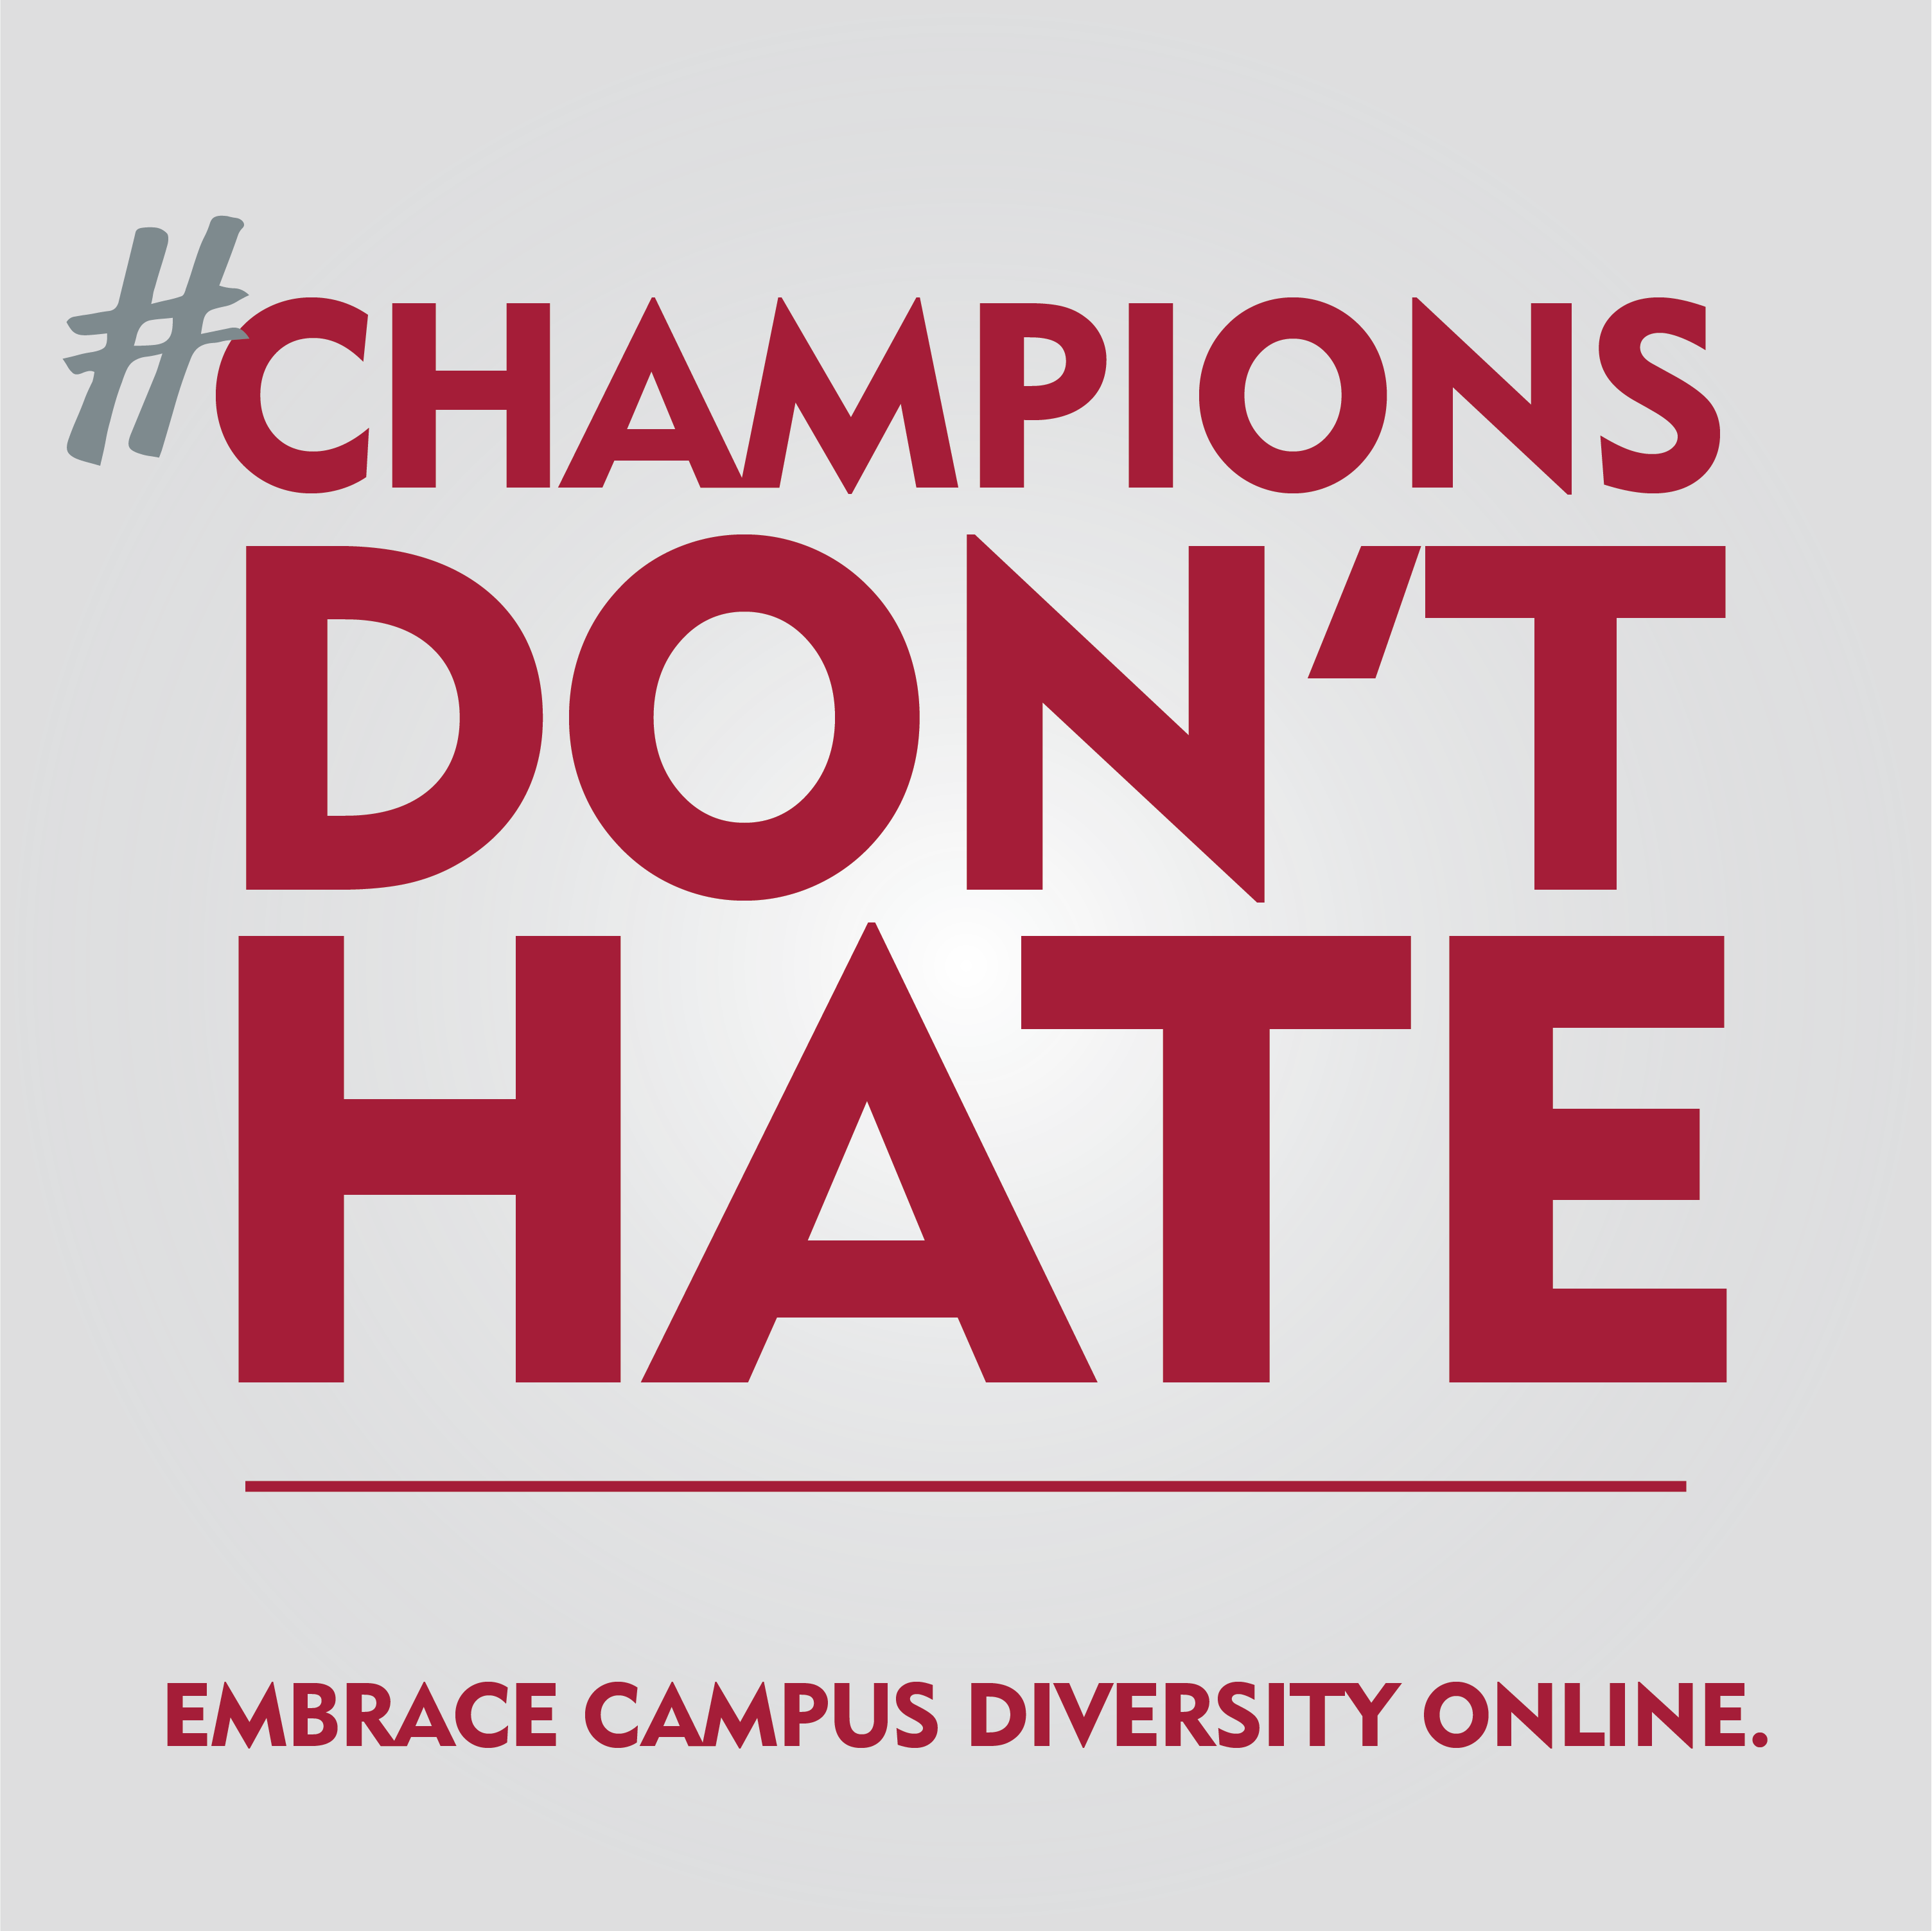 Champions Don’t Hate